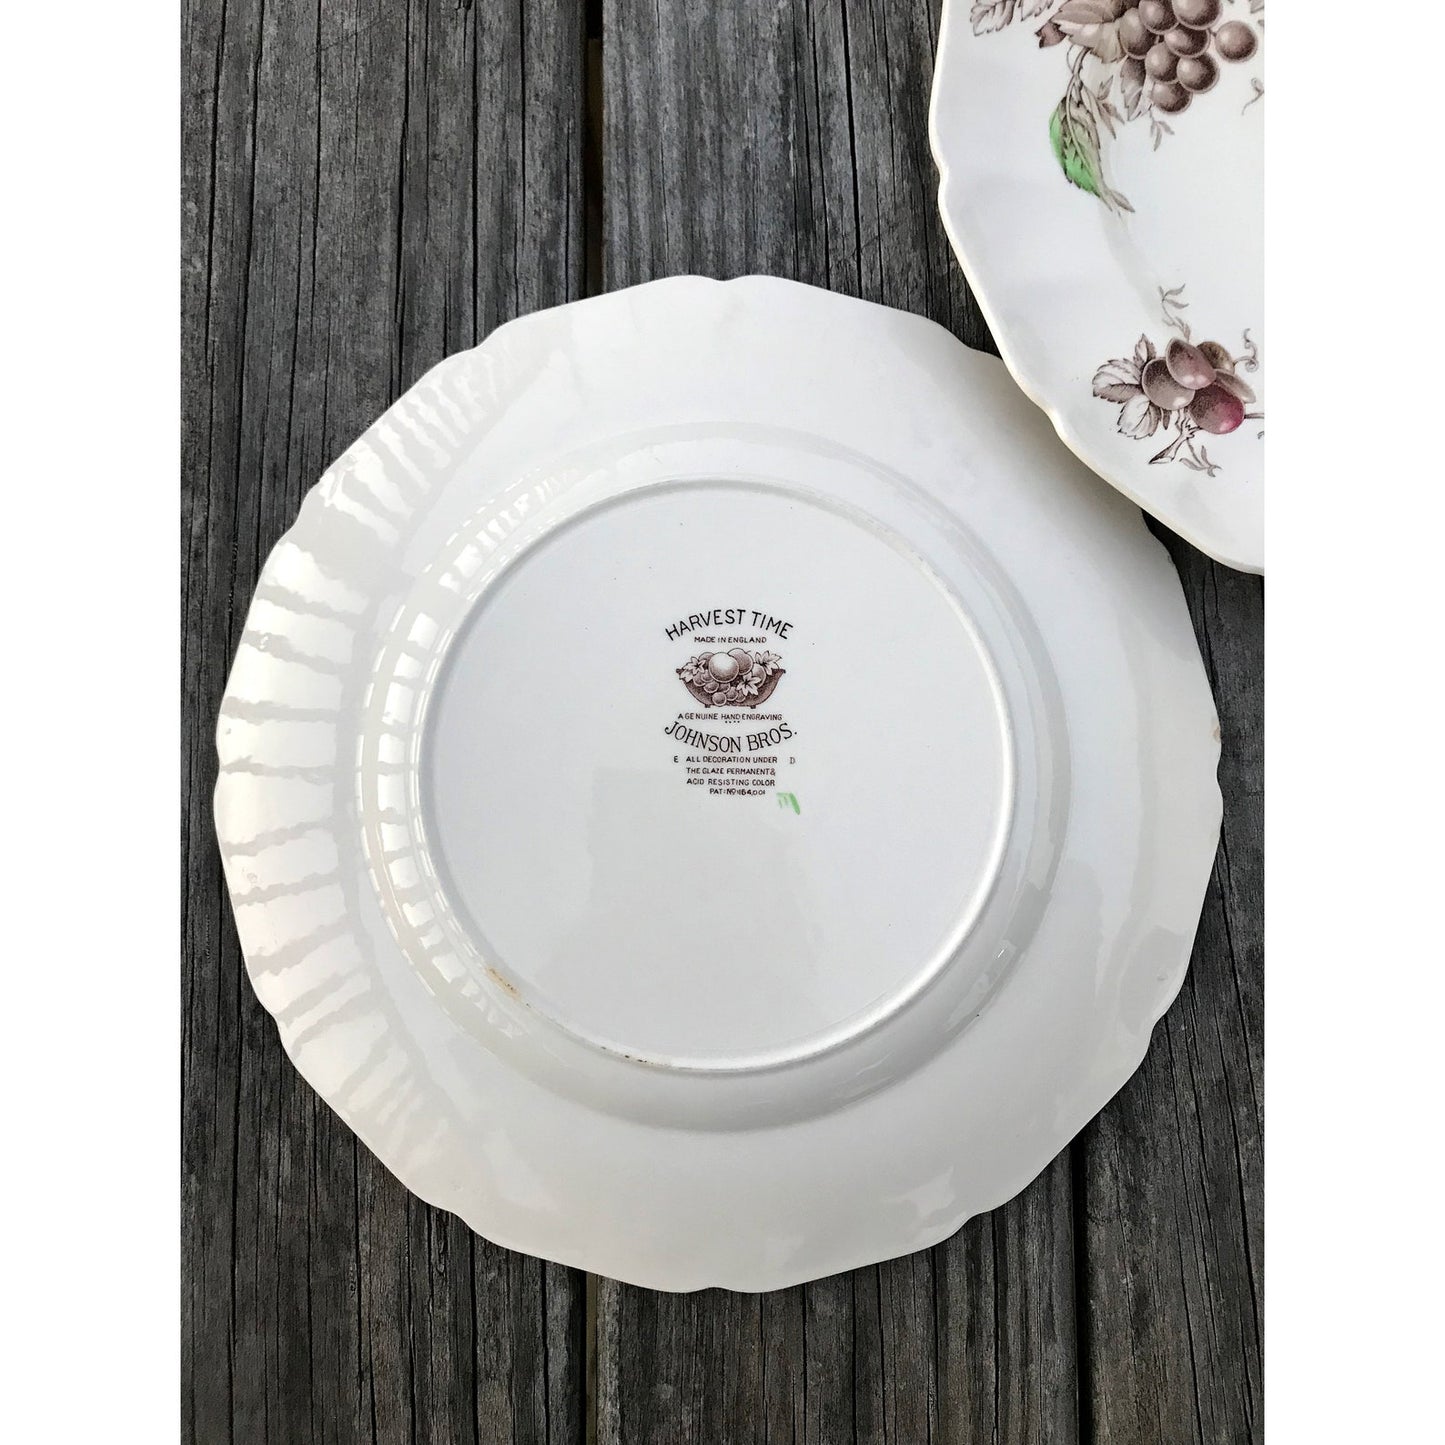 Johnson Brothers Harvest Time Service Plate / Charger